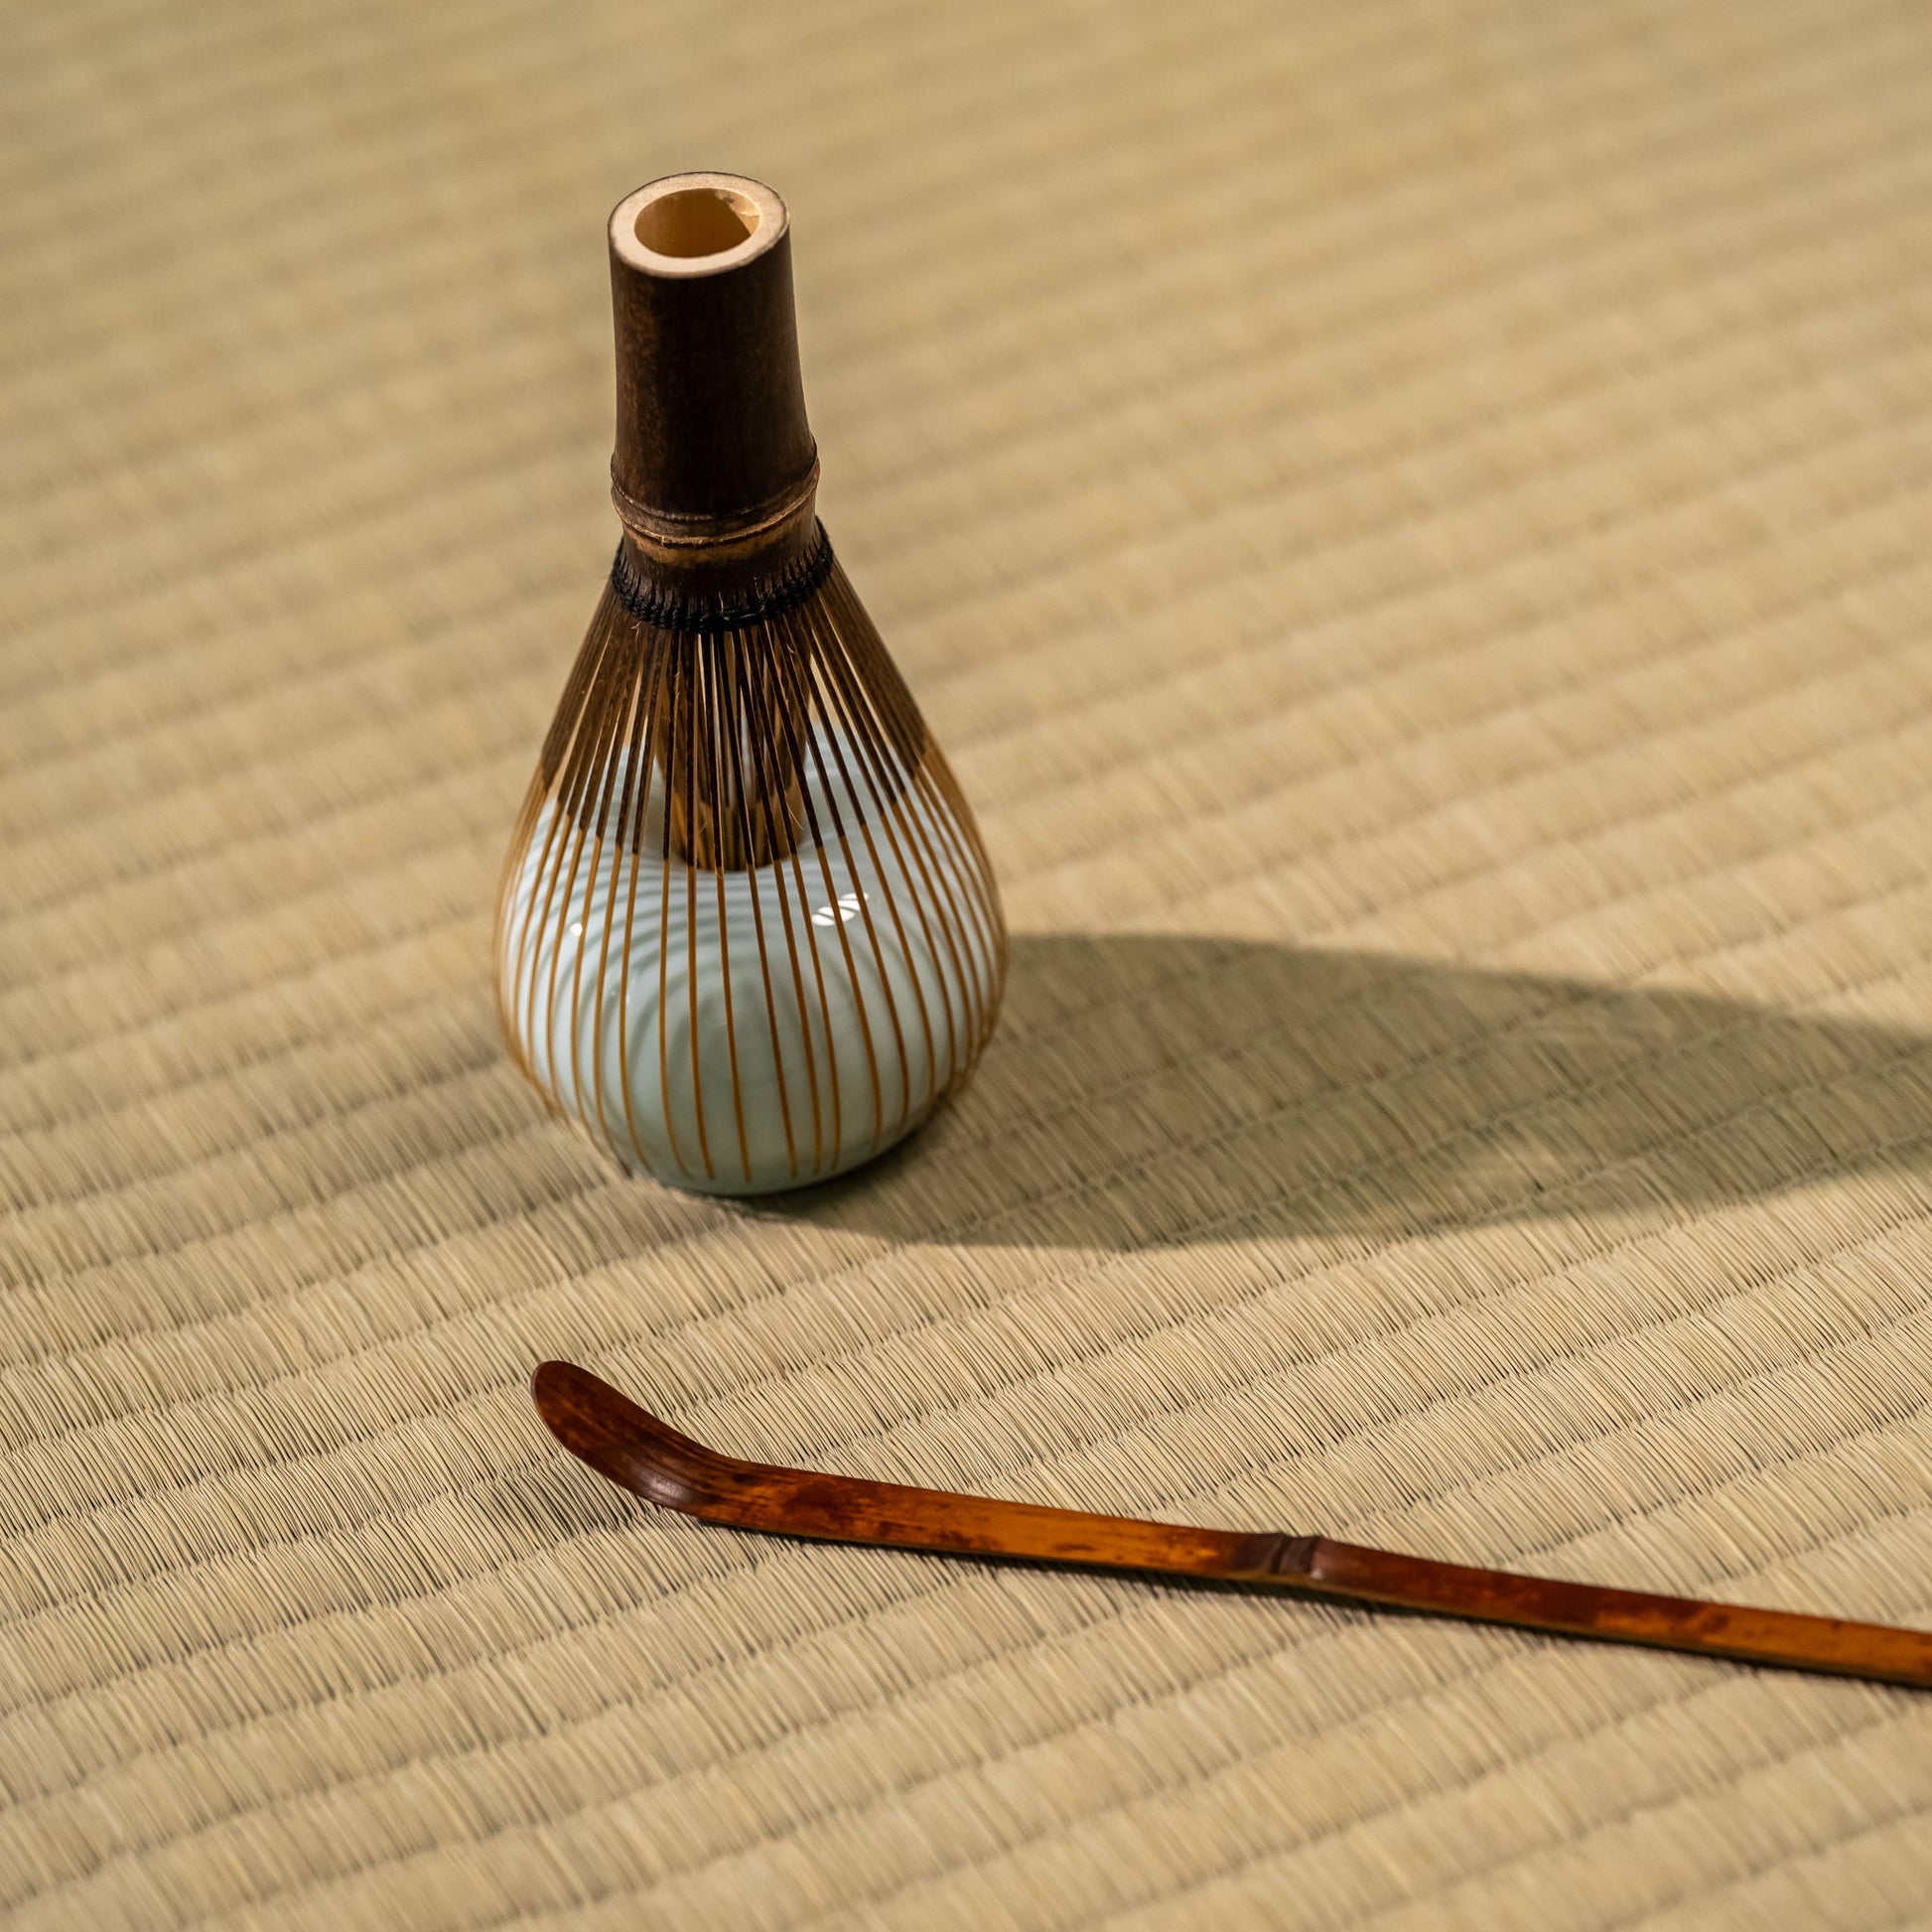 A Japanese matcha whisk and bamboo spoon on a tatami mat